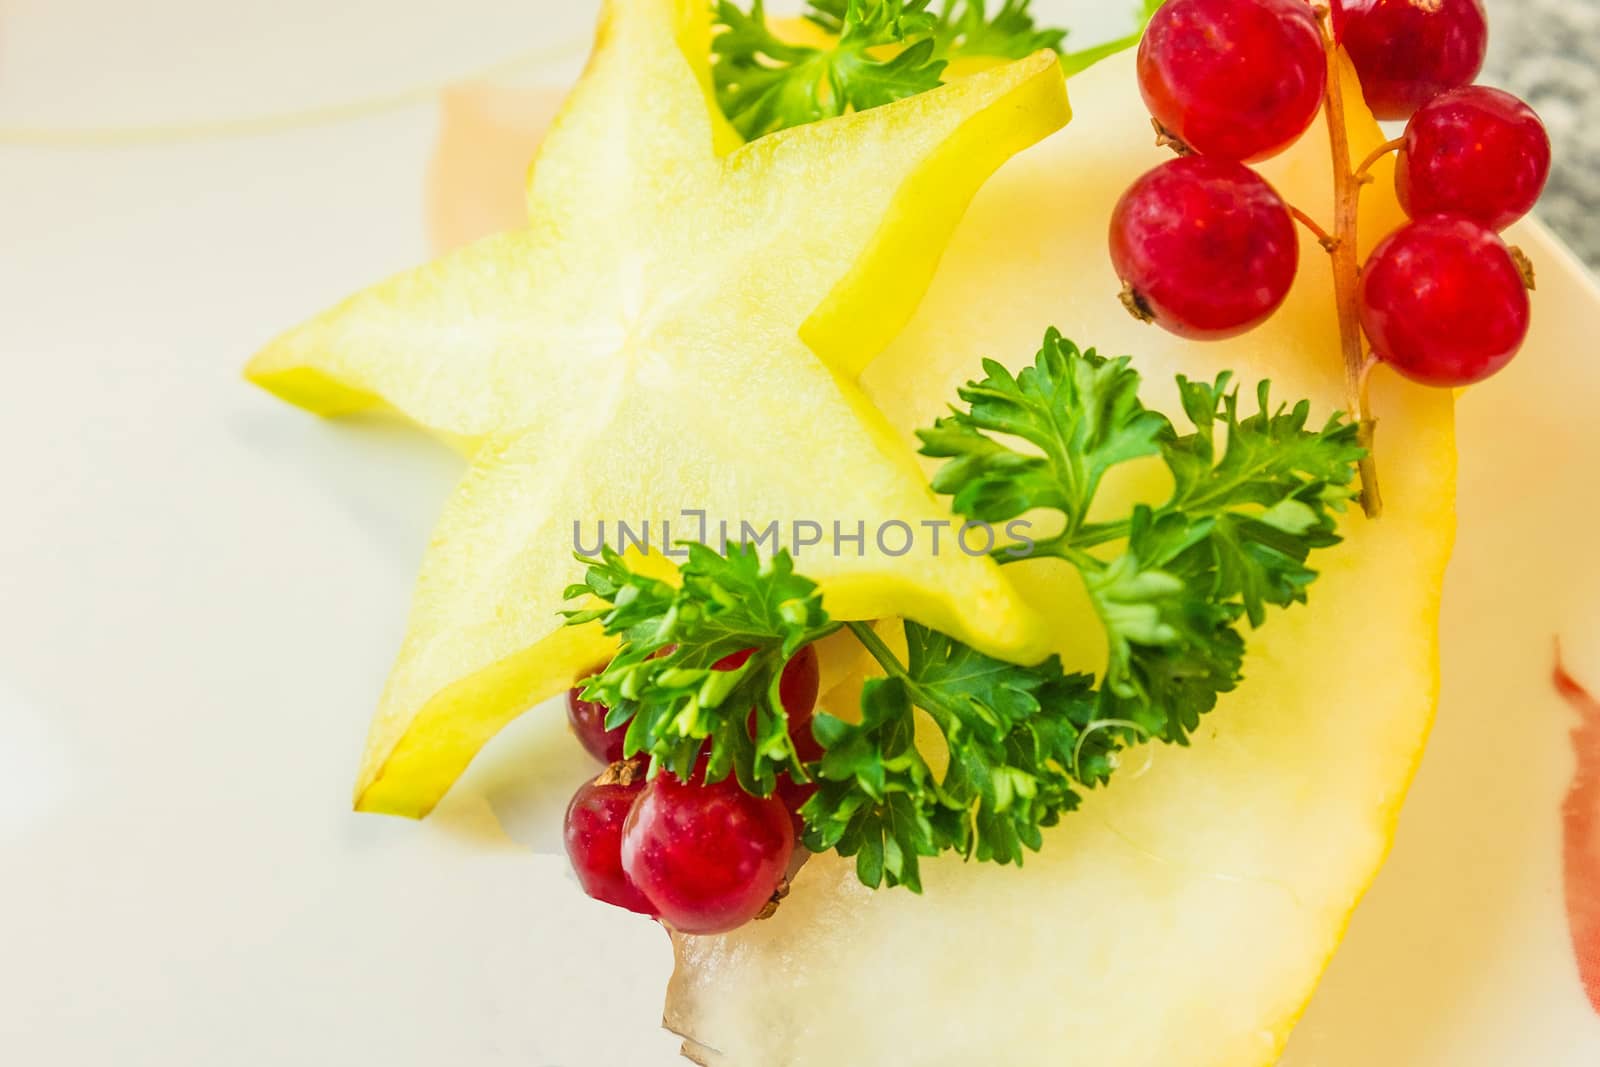 A slice of carambola or star fruit with currants with stems and parsley on a slice of melon in a white china bowl.
